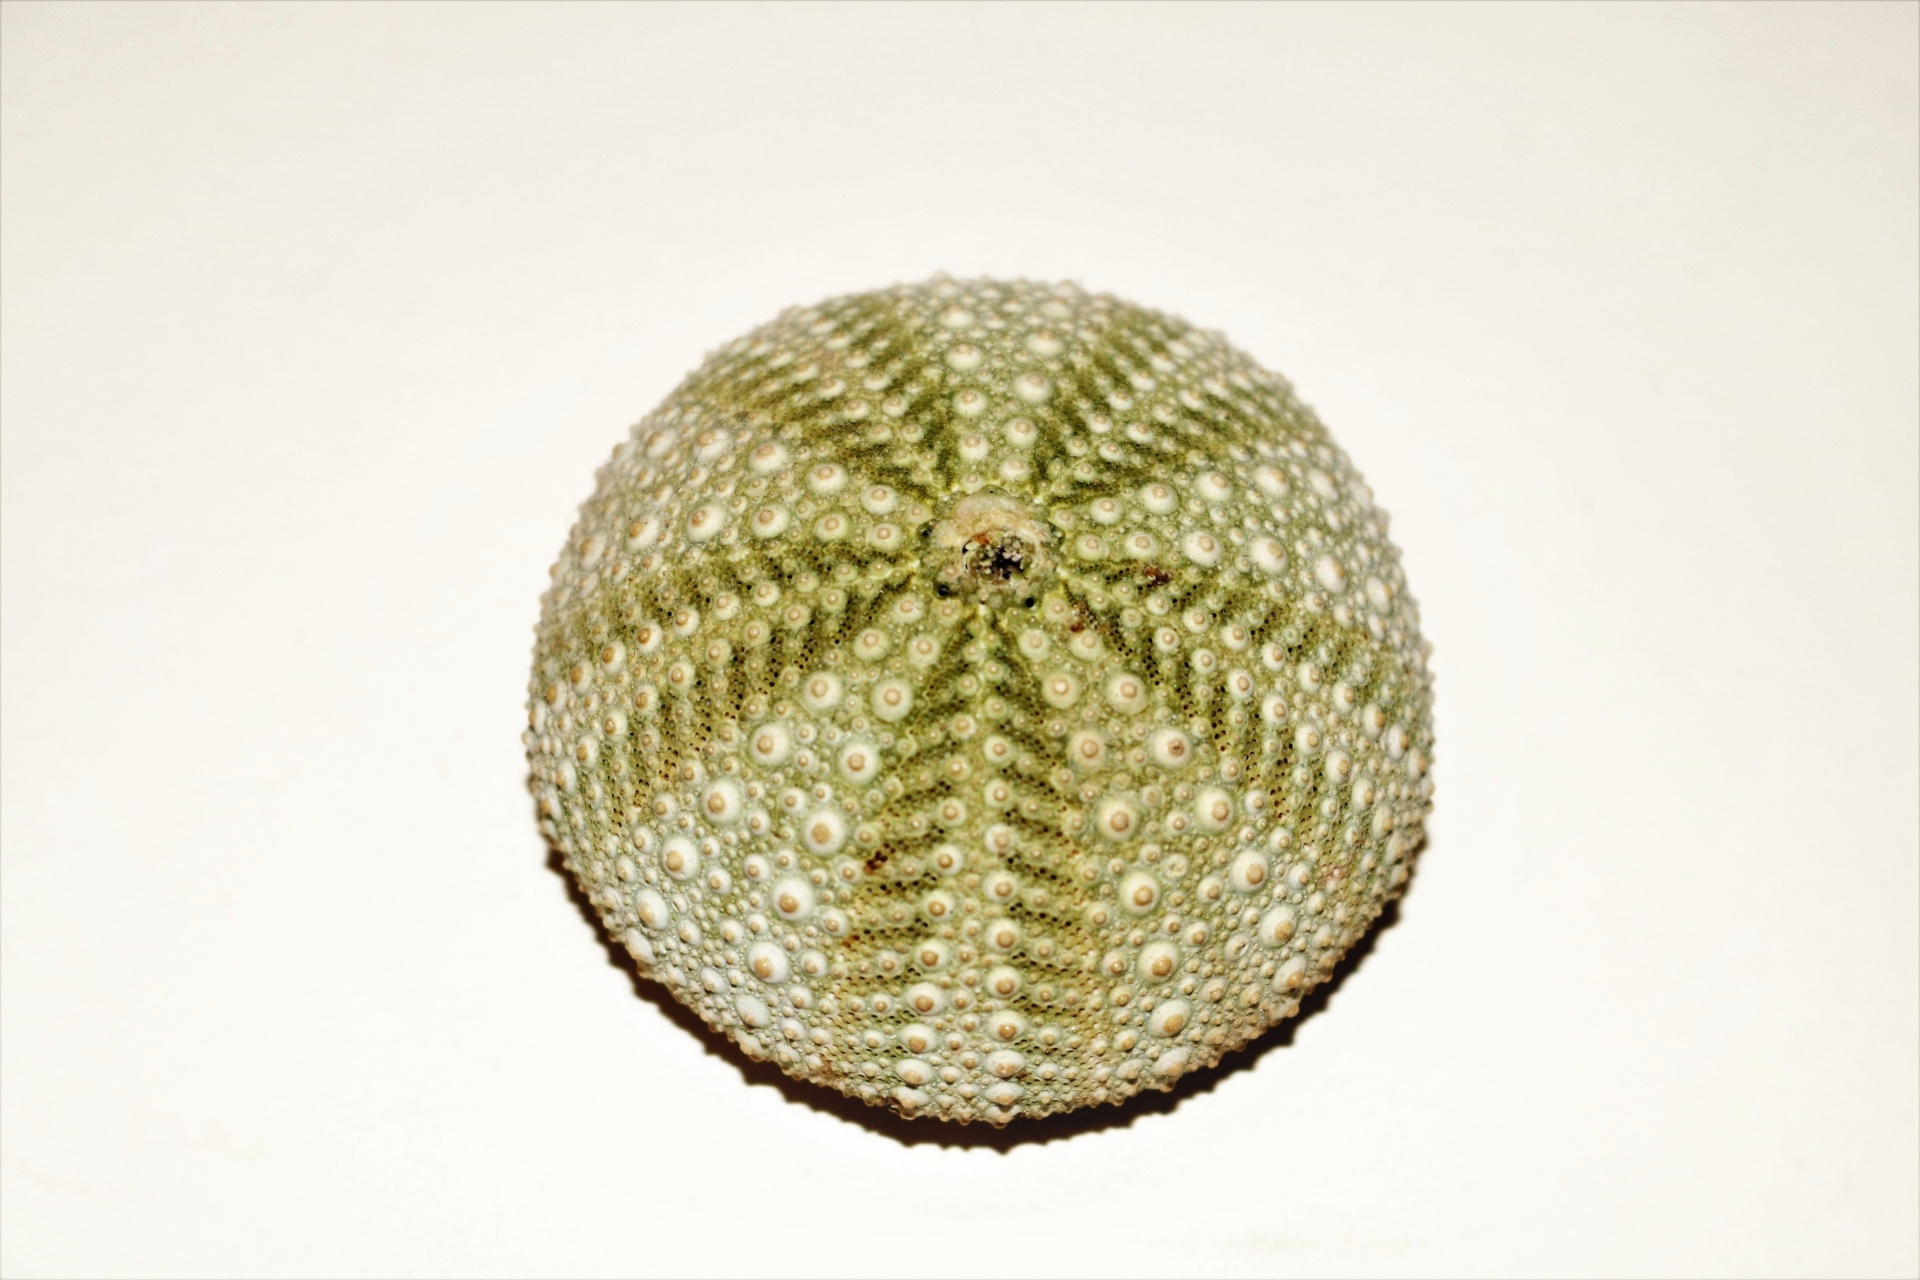 Close-up of a green sea urchin isolated on a white background.